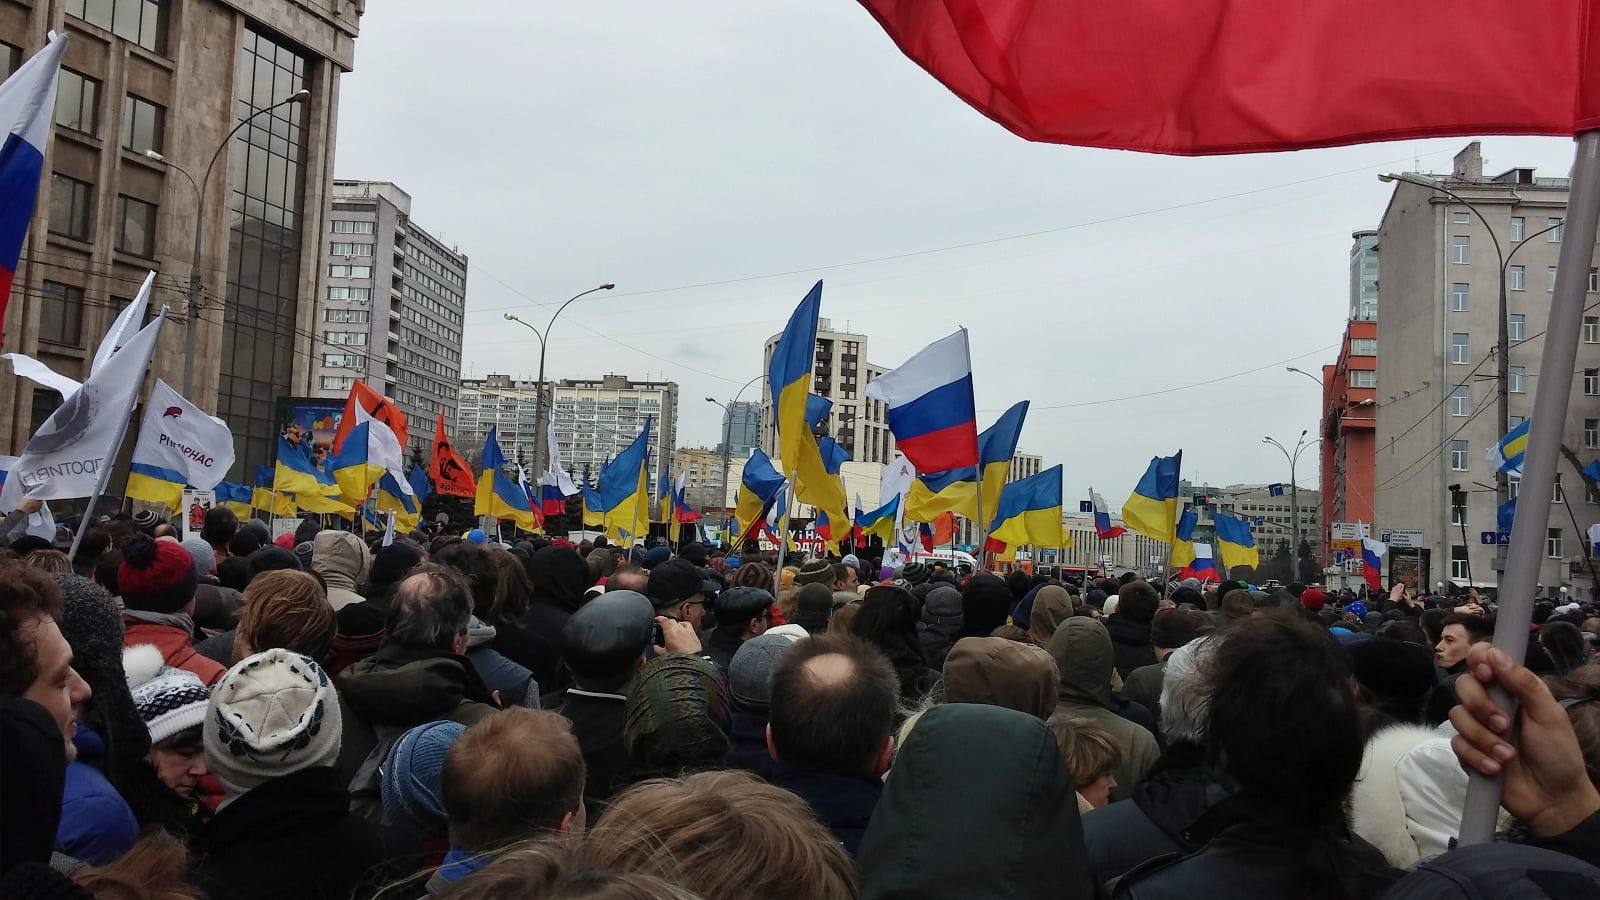 protests in Russia against the war in Ukraine in 2014